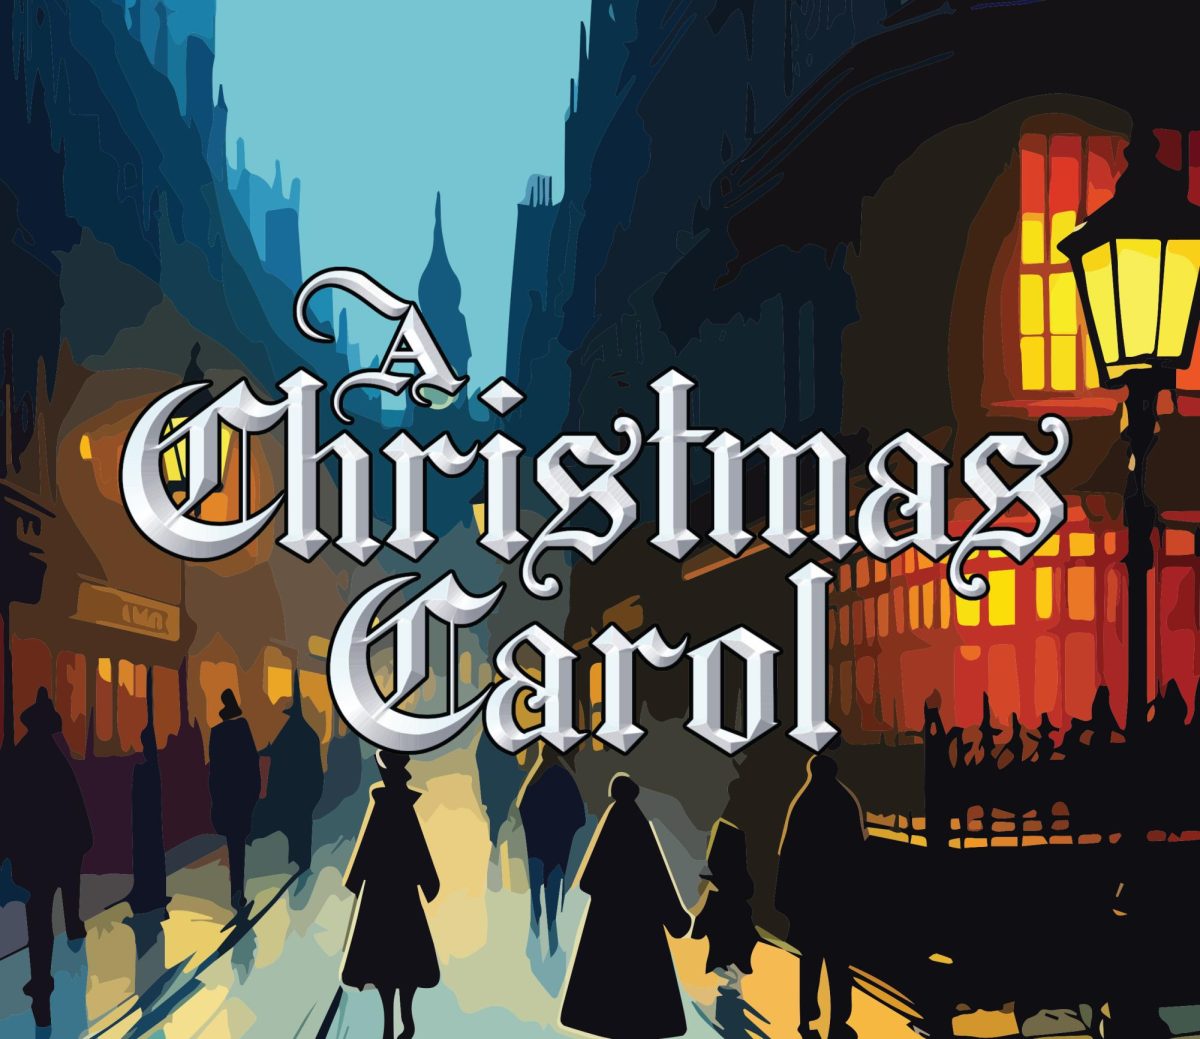 SRJC Theatre Arts Department Chair James Newman has always wanted to produce A Christmas Carol, and is excited to present this classic story in musical form. 